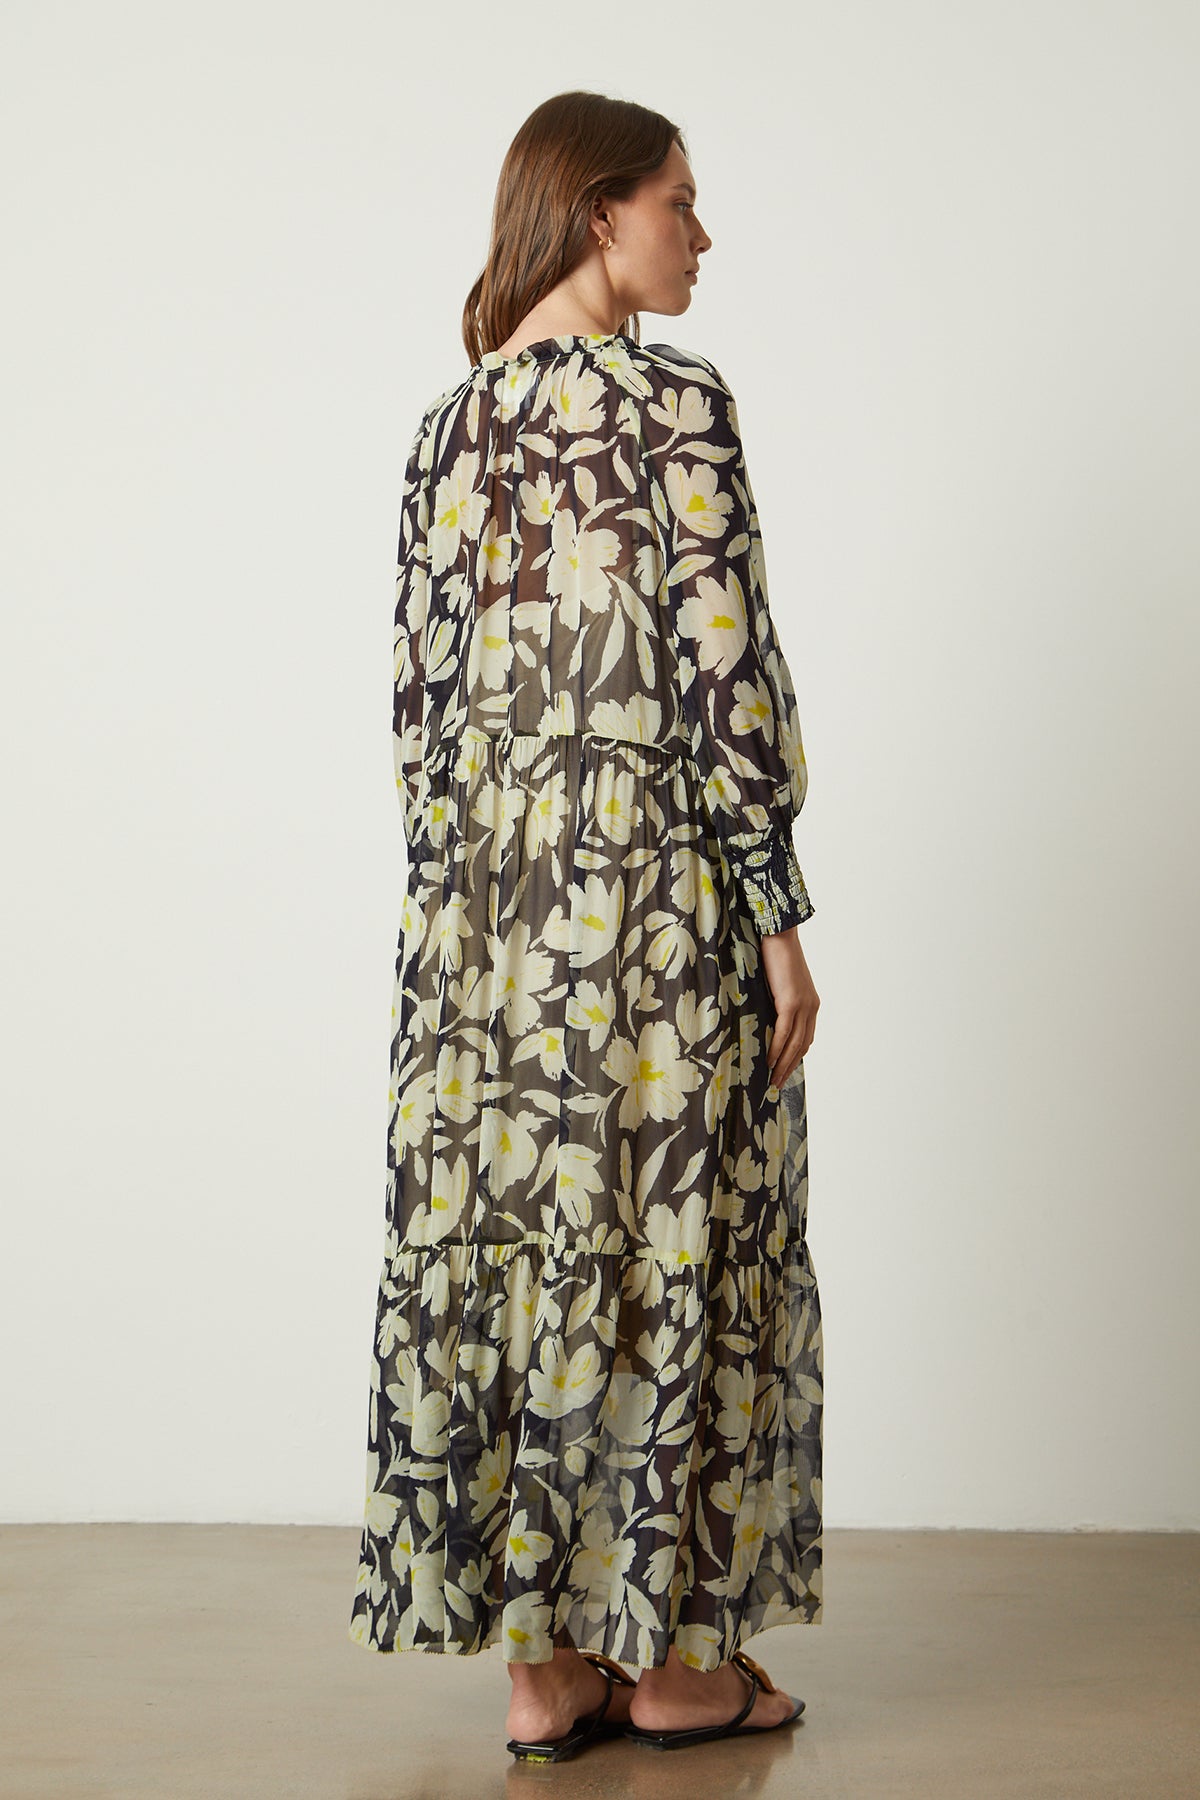 The back view of a woman wearing a Velvet by Graham & Spencer Serena Printed Maxi Dress.-26317295091905